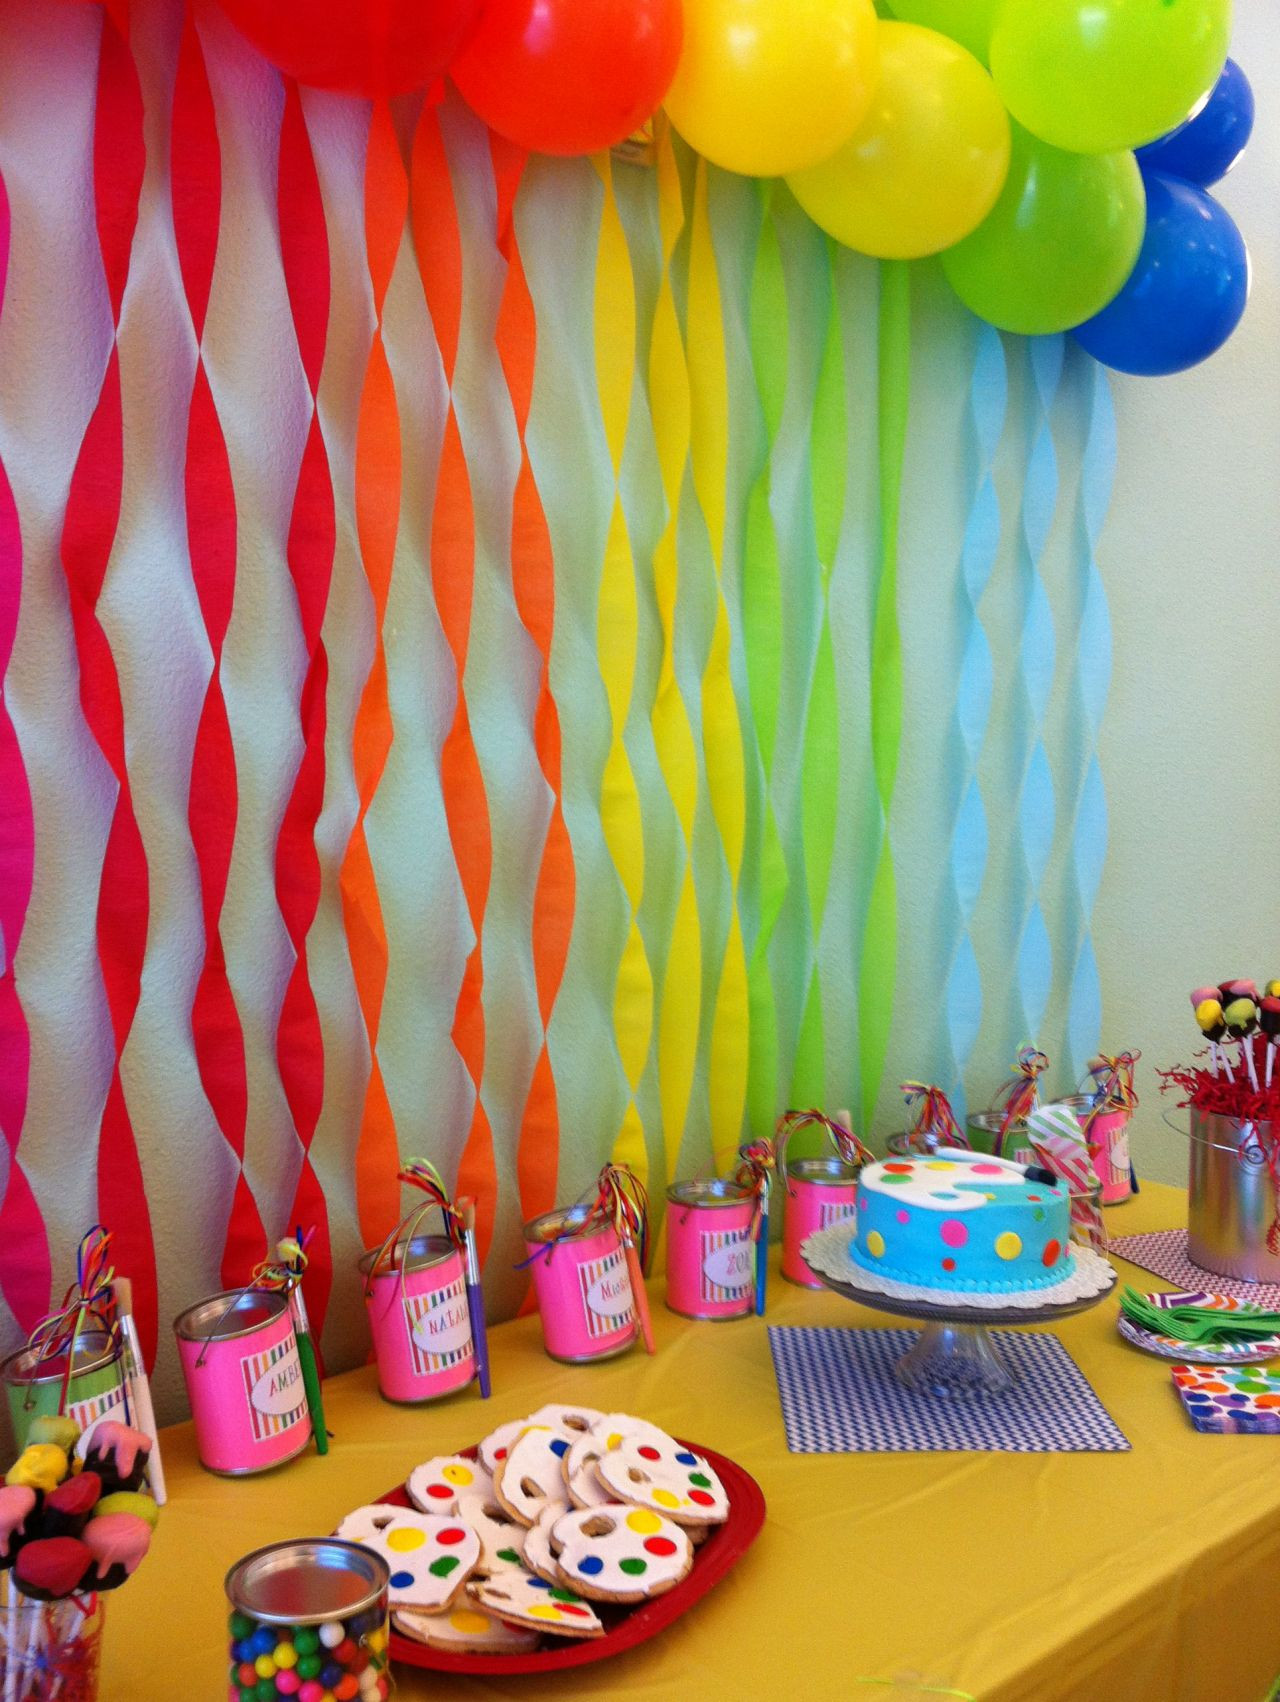 Four Year Old Birthday Party Ideas
 Get These 12 of 4 Year Old Boy Birthday Party Ideas